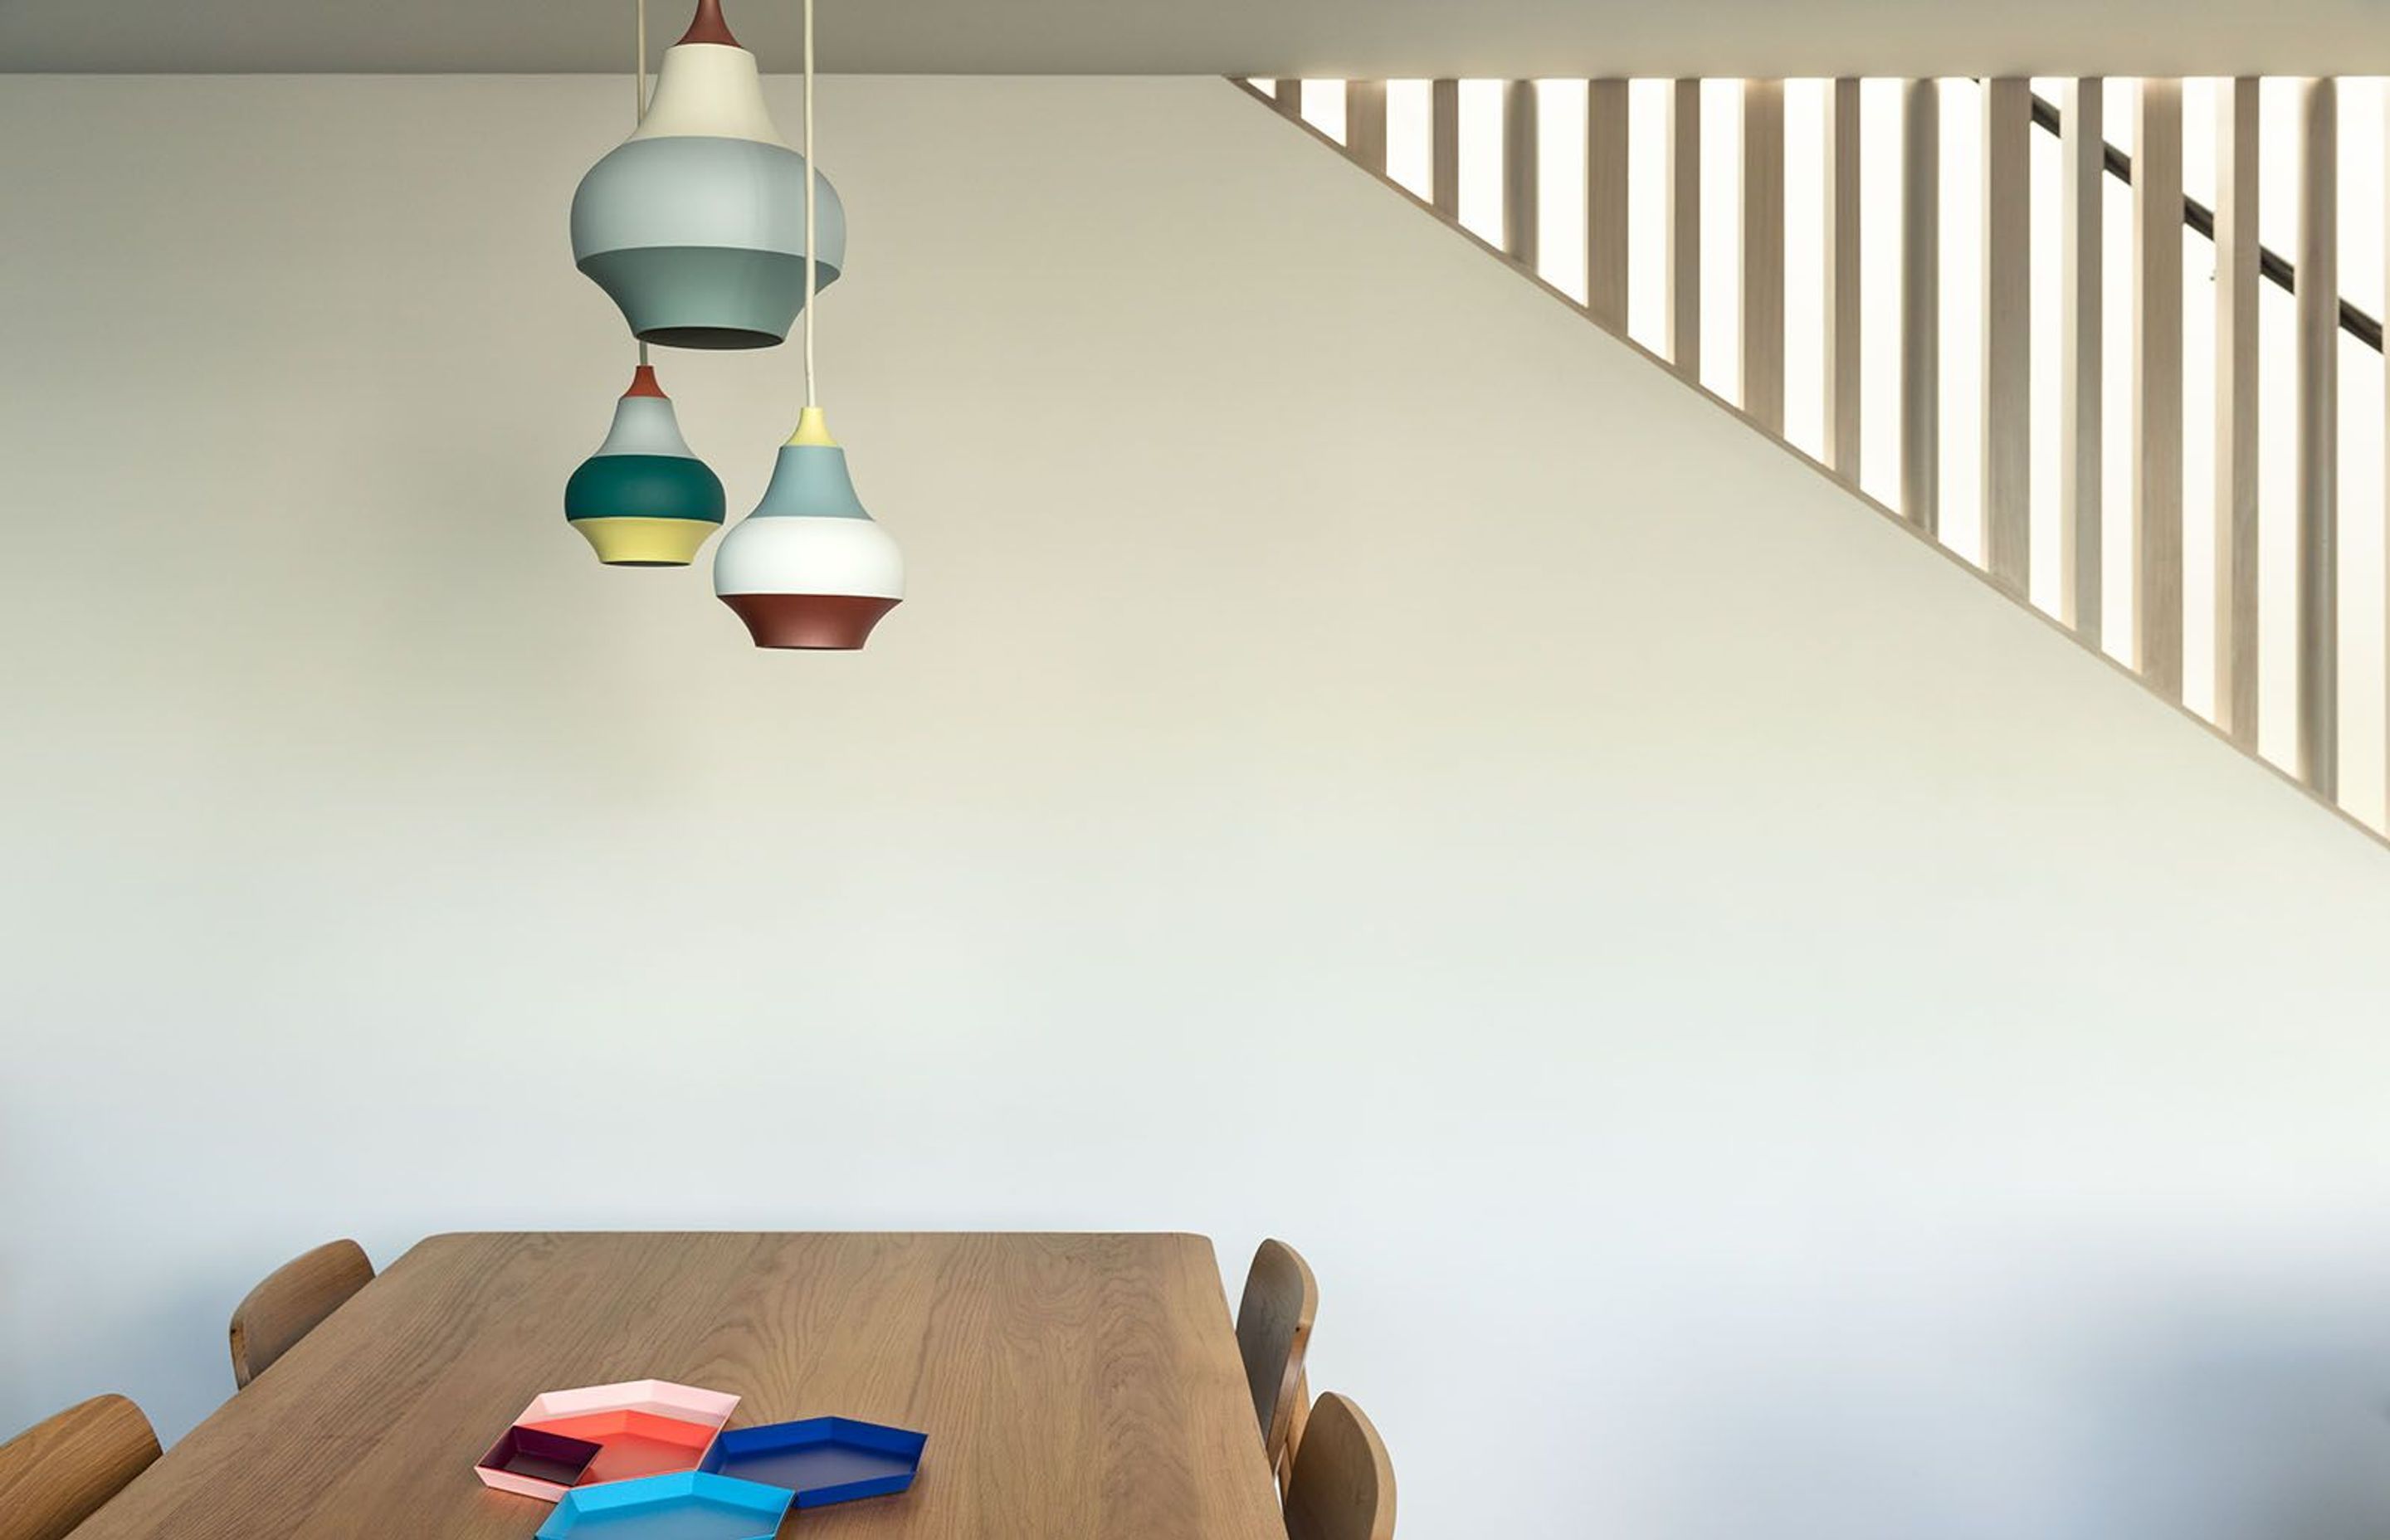 A timber table and chairs from Citta have an added Injection of colour in the pendant lighting and hexagonal snack trays.